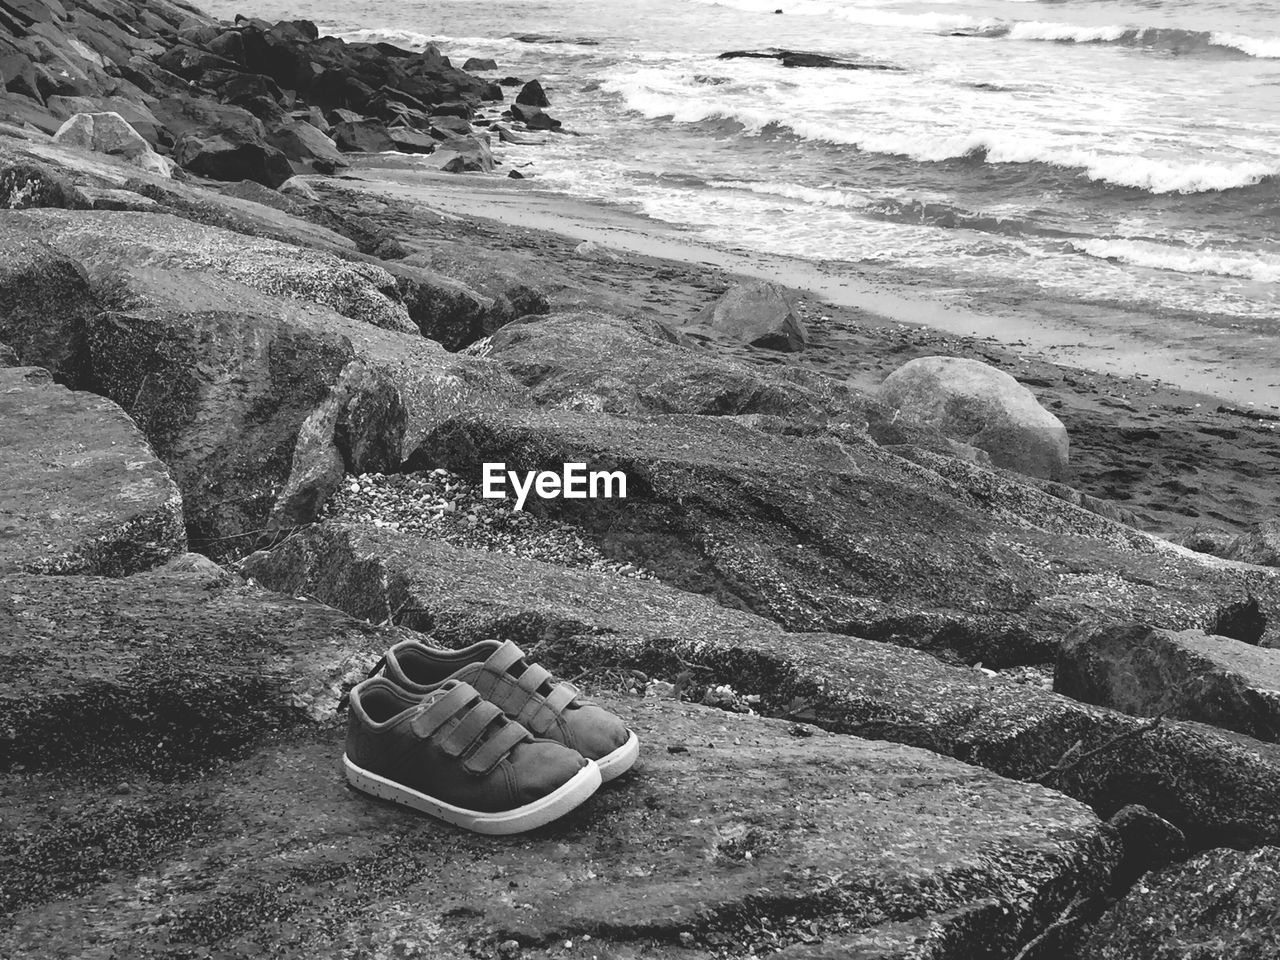 Shoes on rock by sea